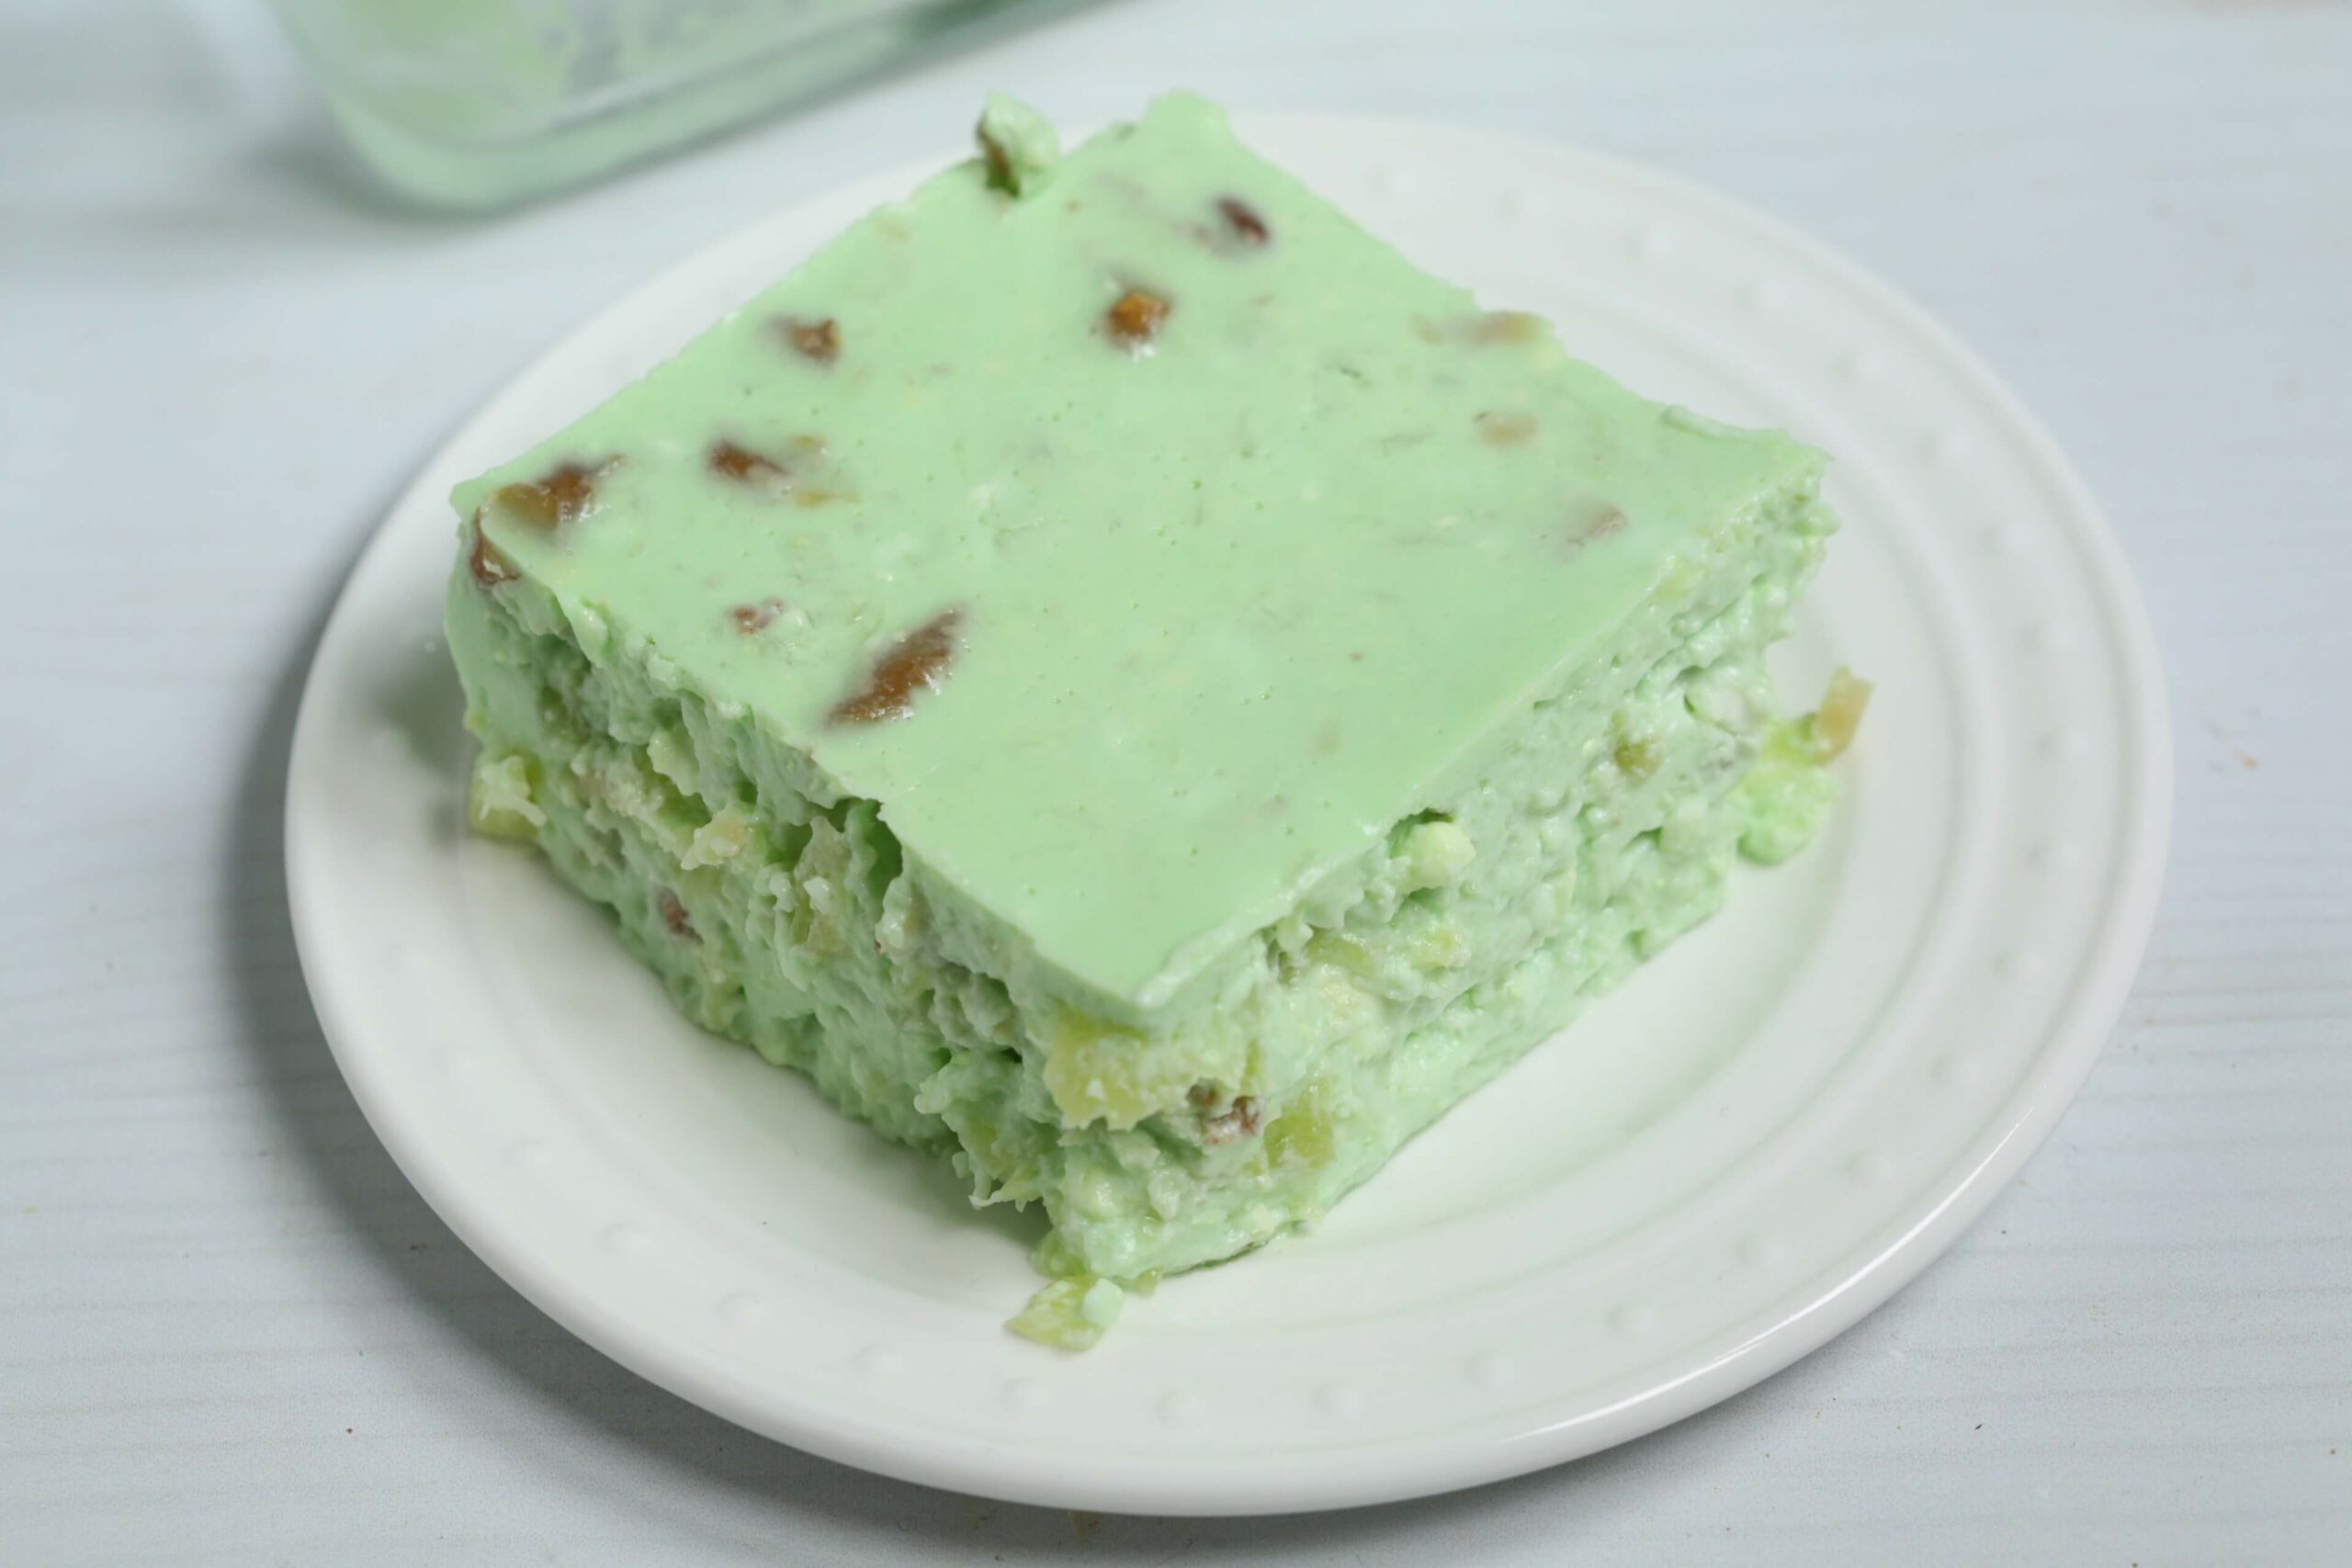 A side view of the lime jello salad.